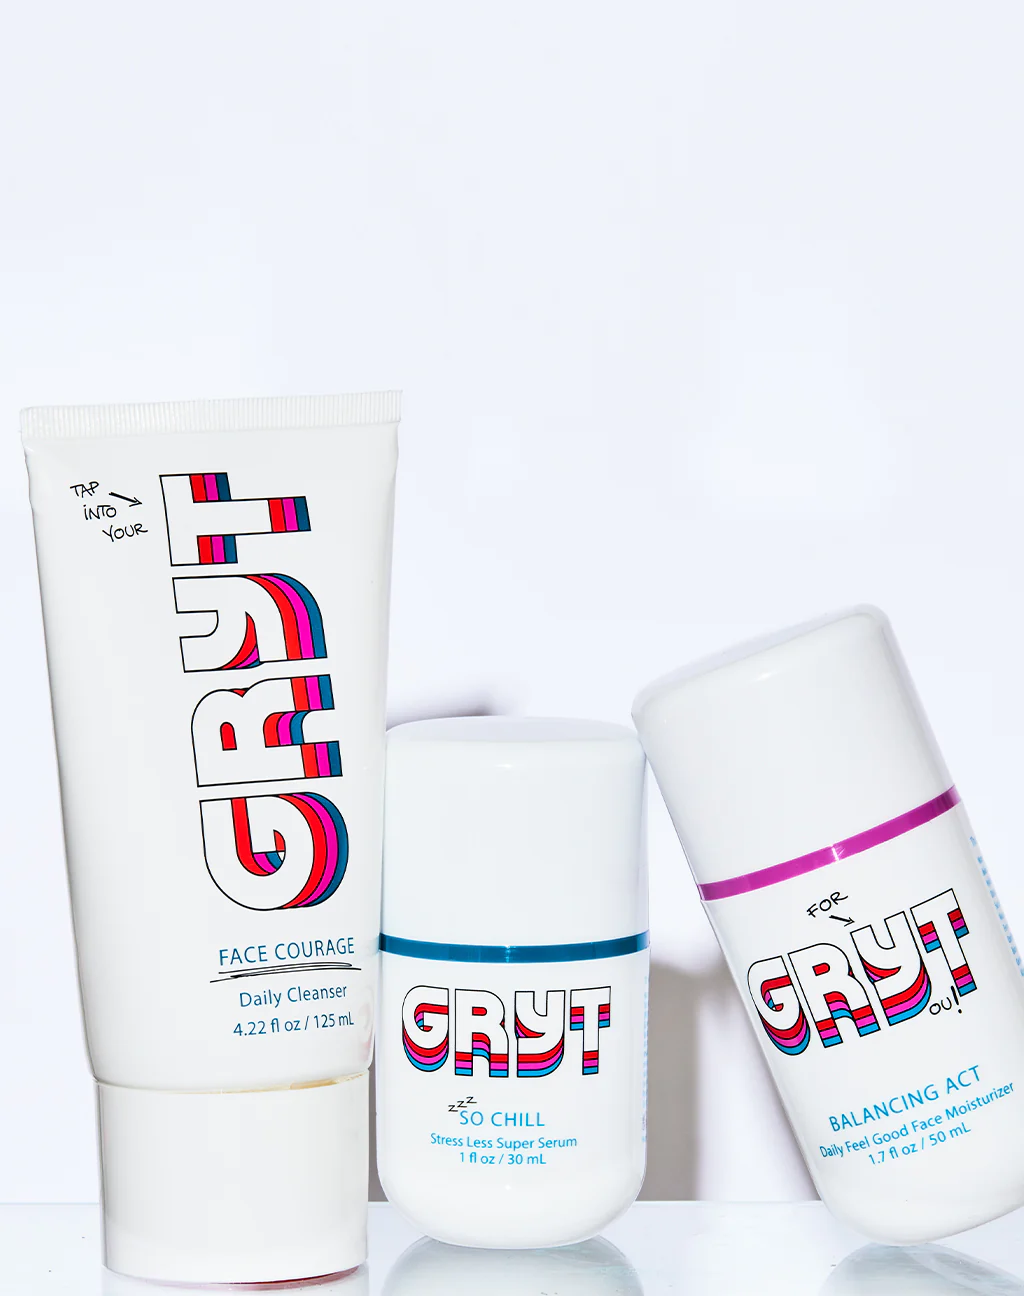 GRYT kit skincare products